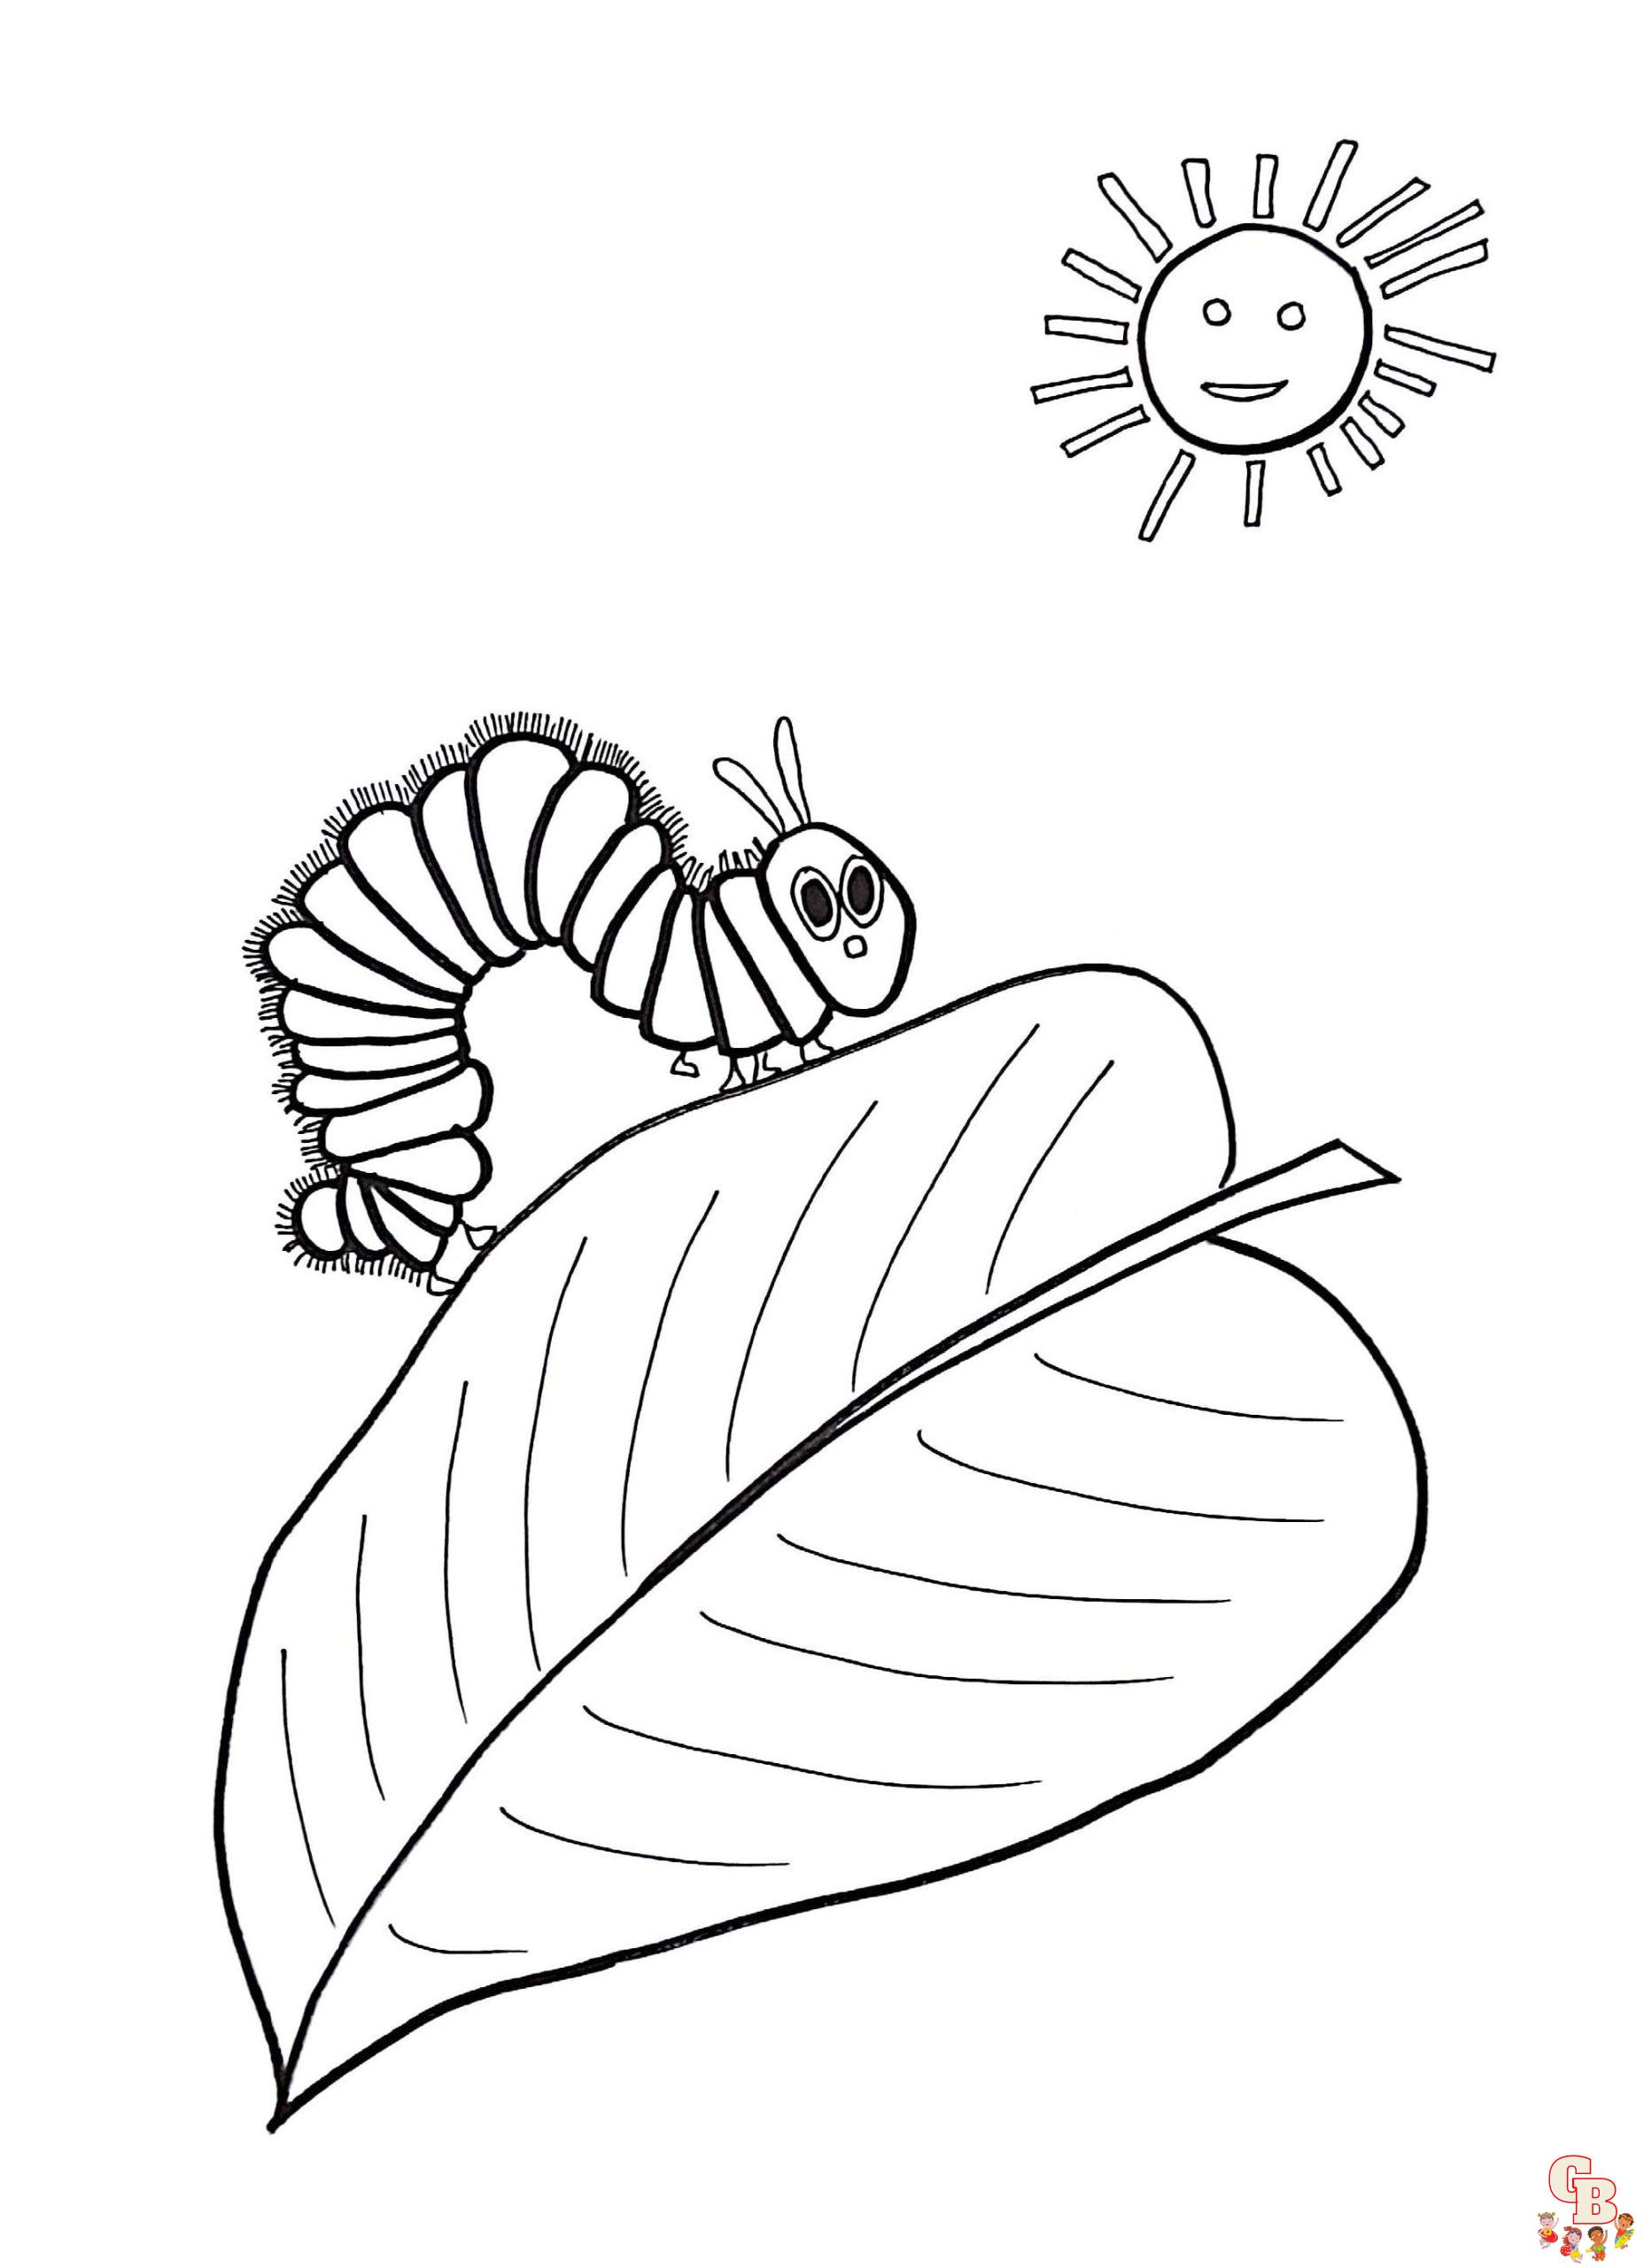 Caterpillar Coloring Pages 10